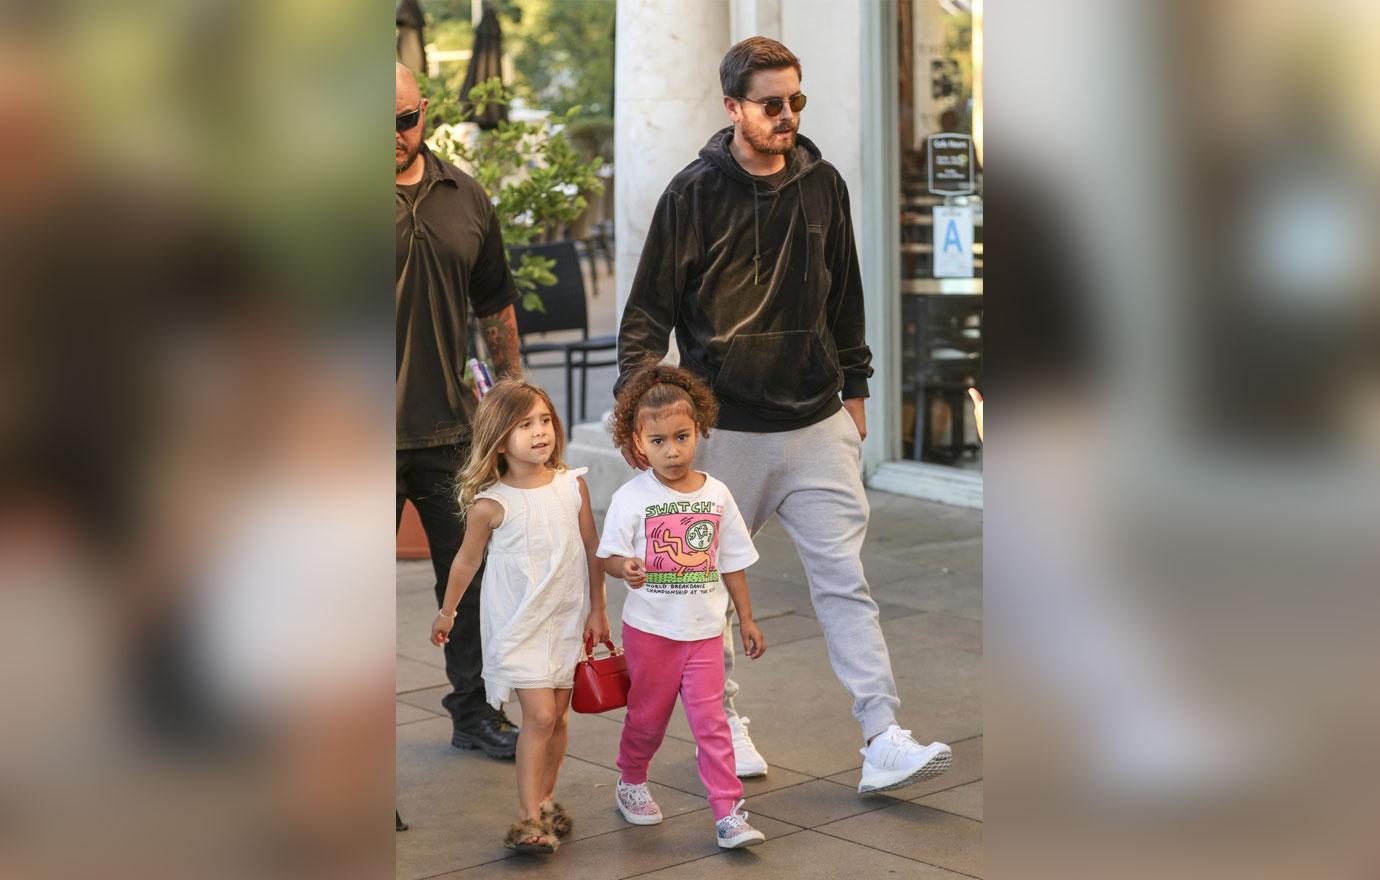 21metgala on X: Scott Disick, Penelope Disick, and North West are